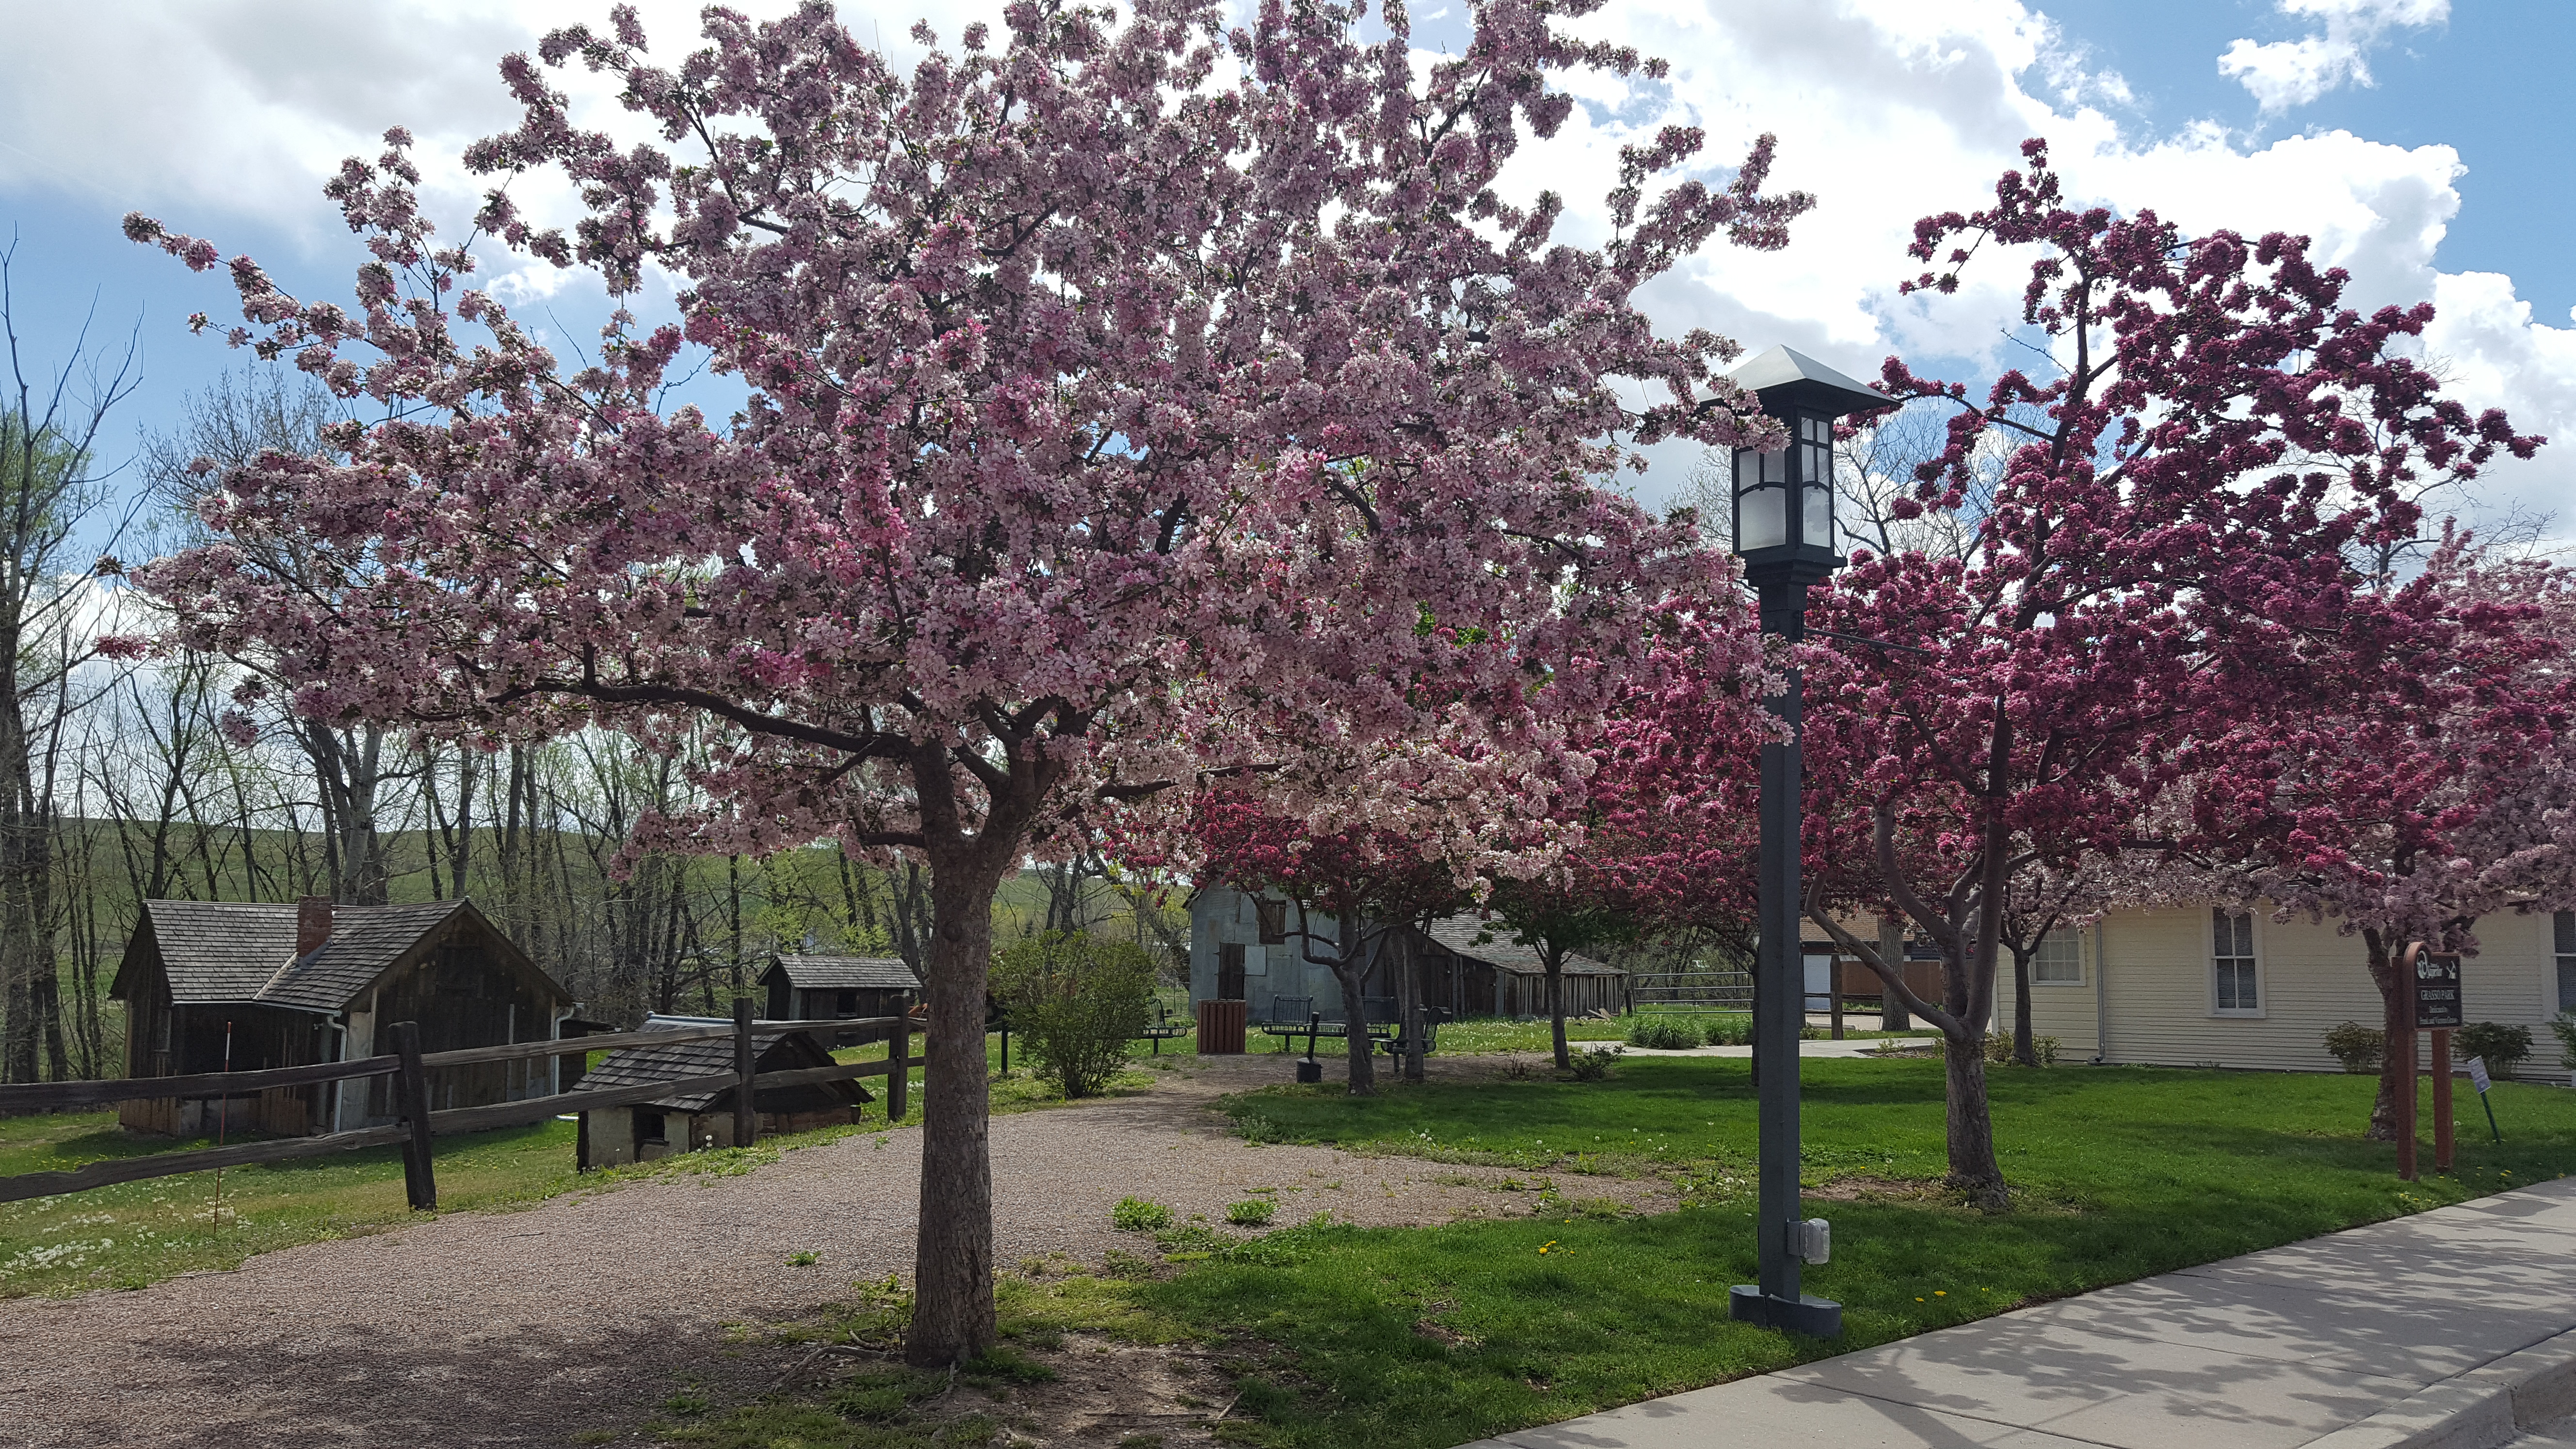 A collection of small buildings among some trees in bloom, in Grasso Park.